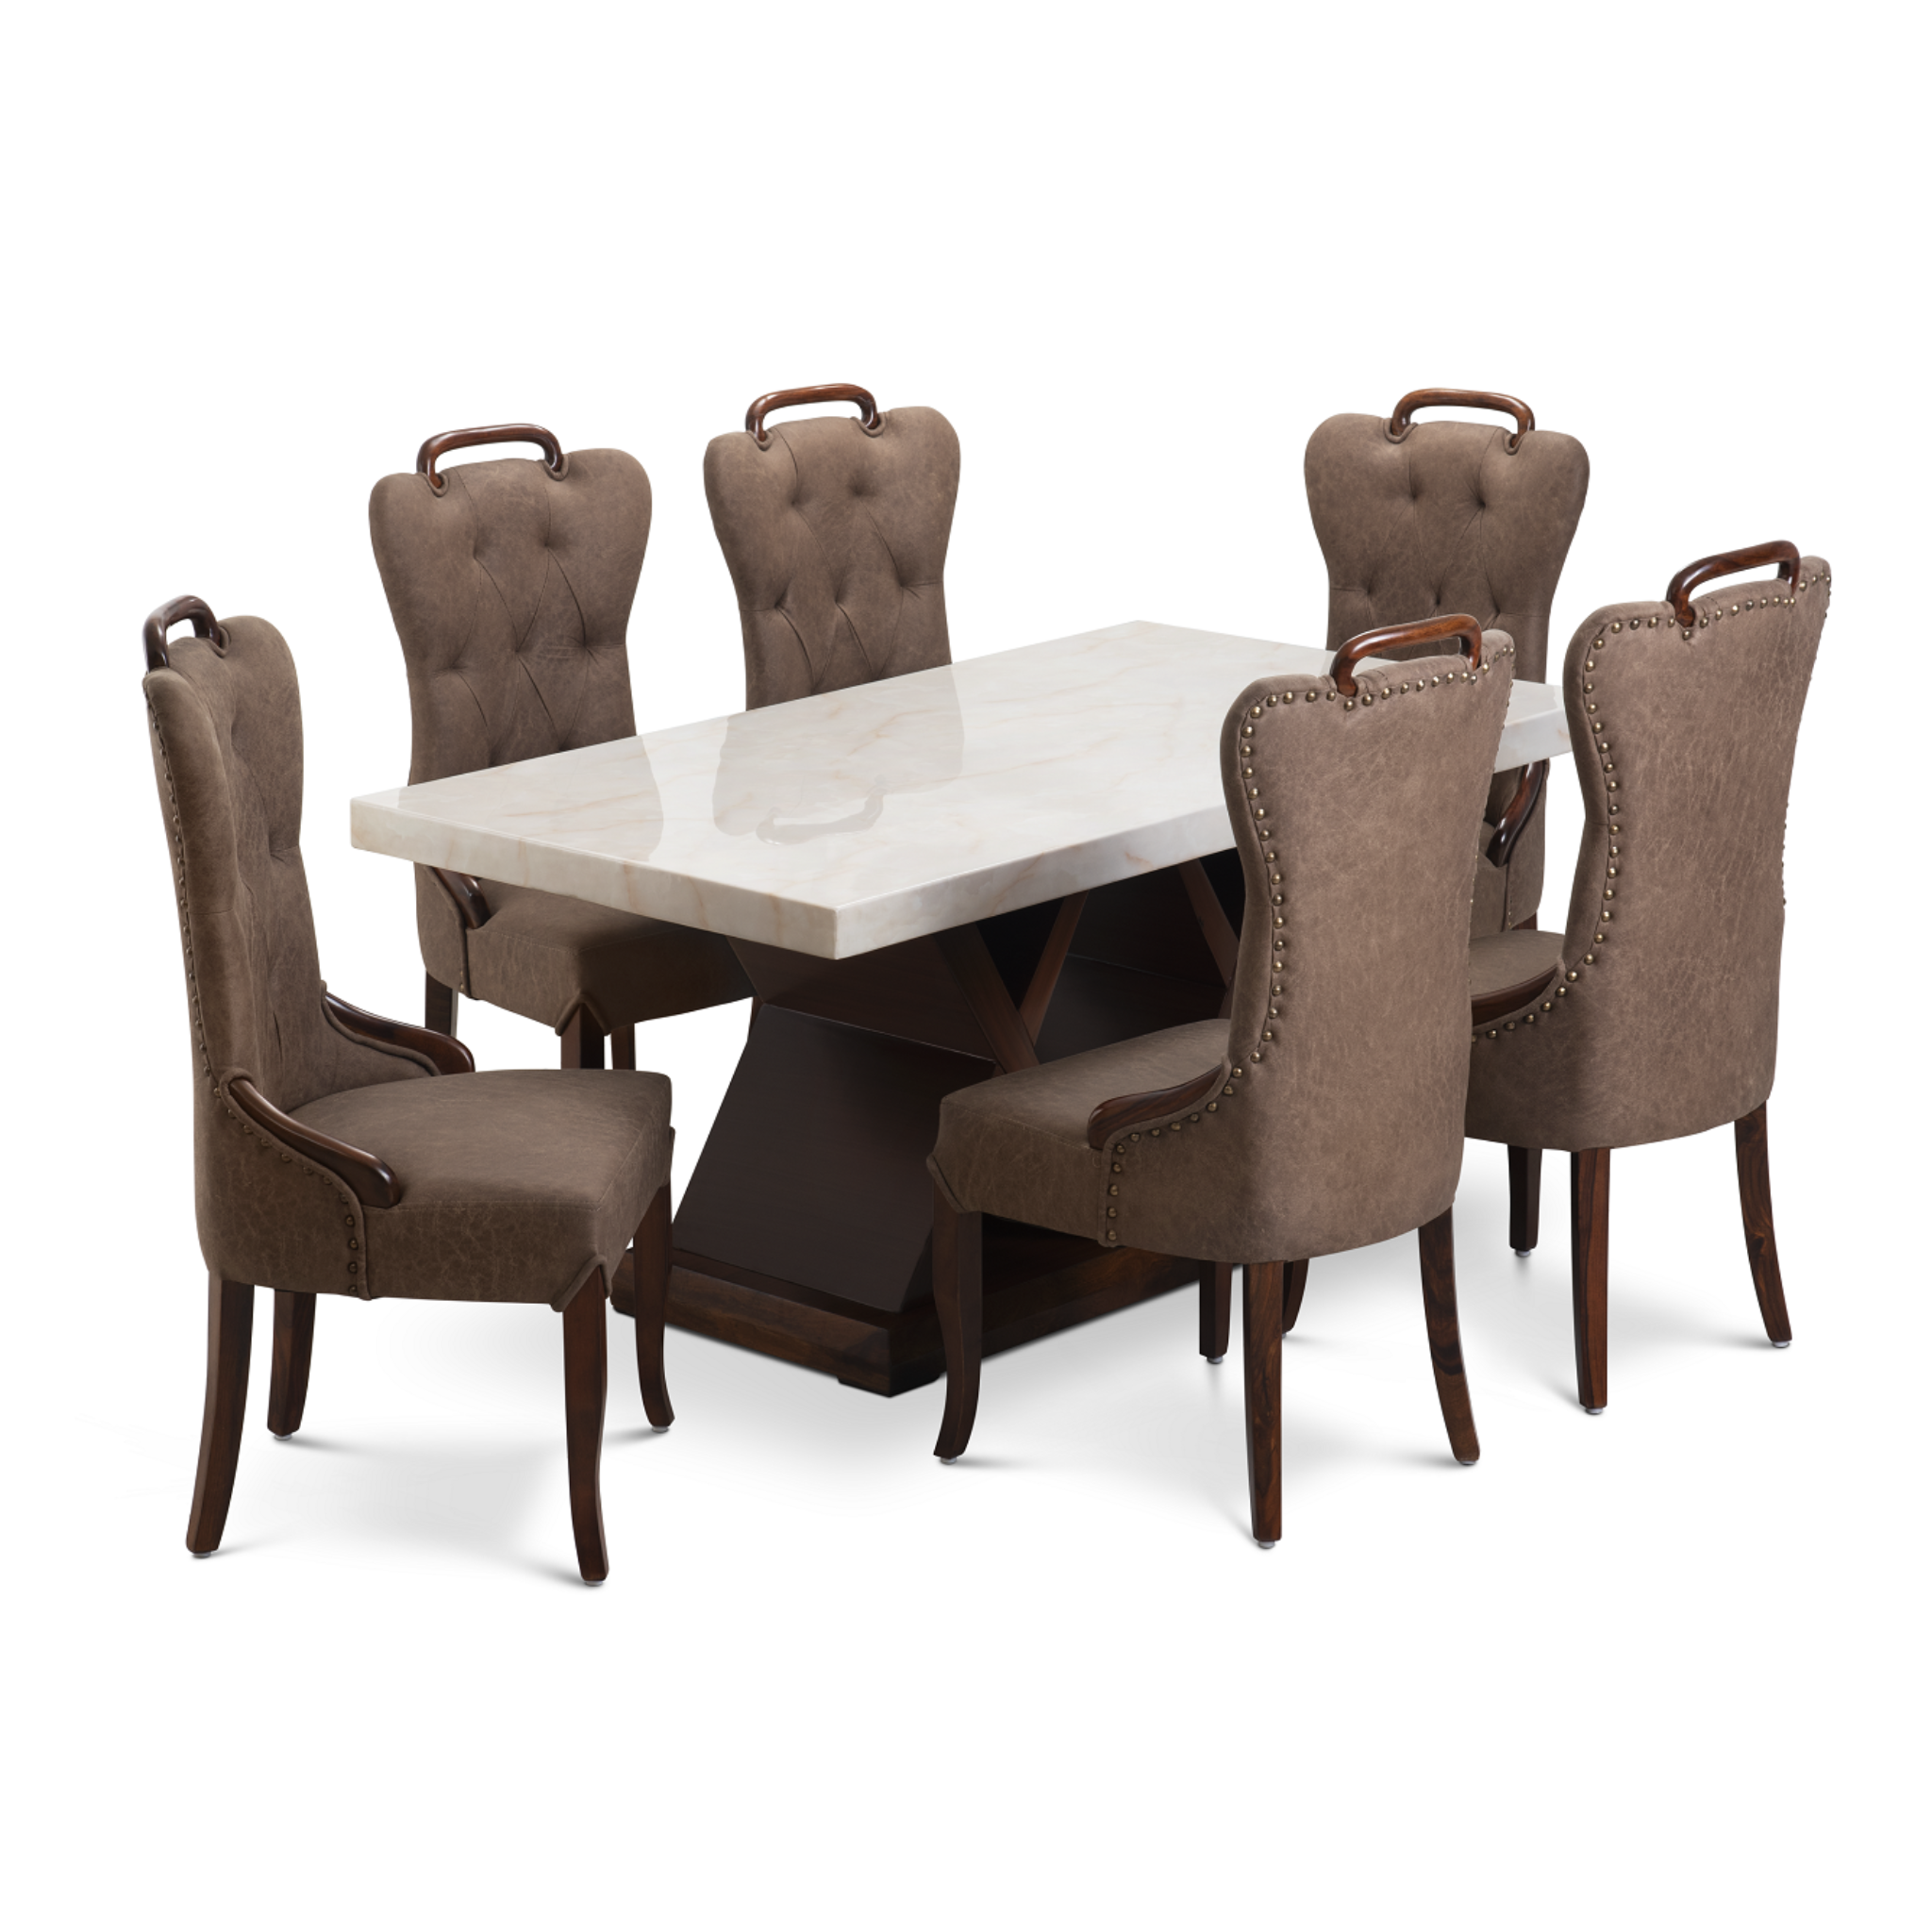 Miami Dining Table with Chair